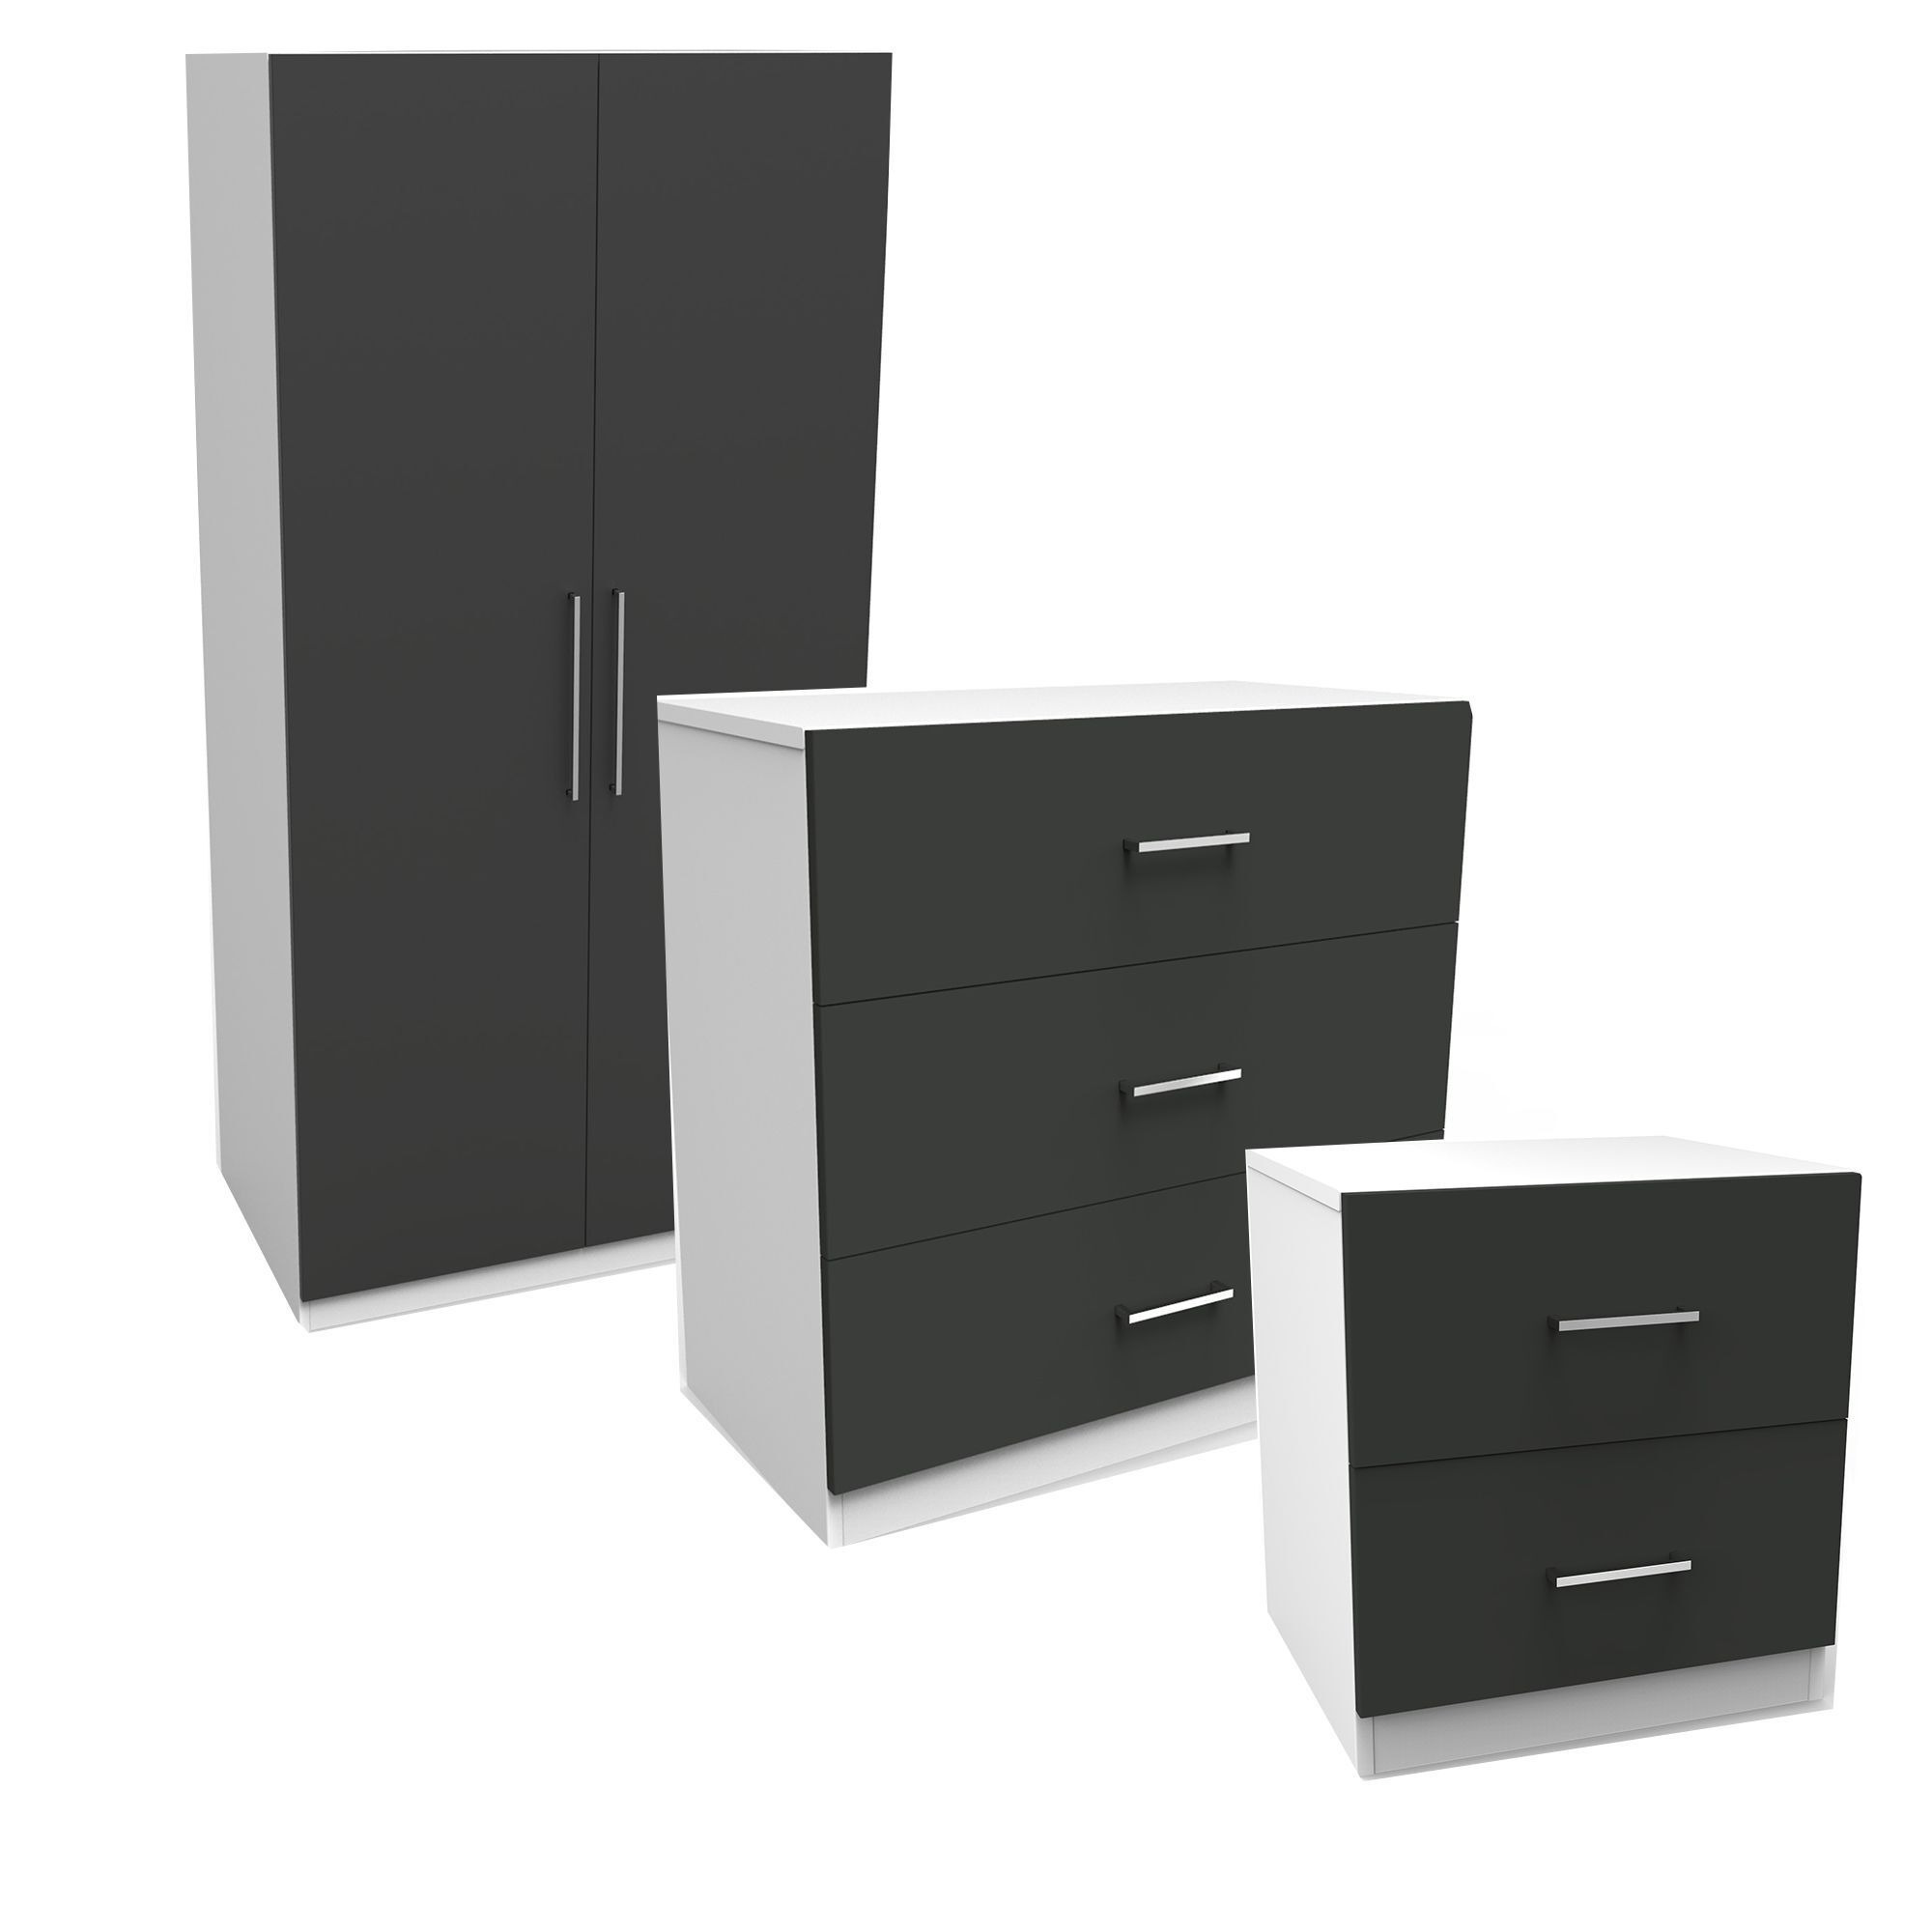 Form Darwin Gloss Anthracite & White 3 Piece Bedroom Furniture Set